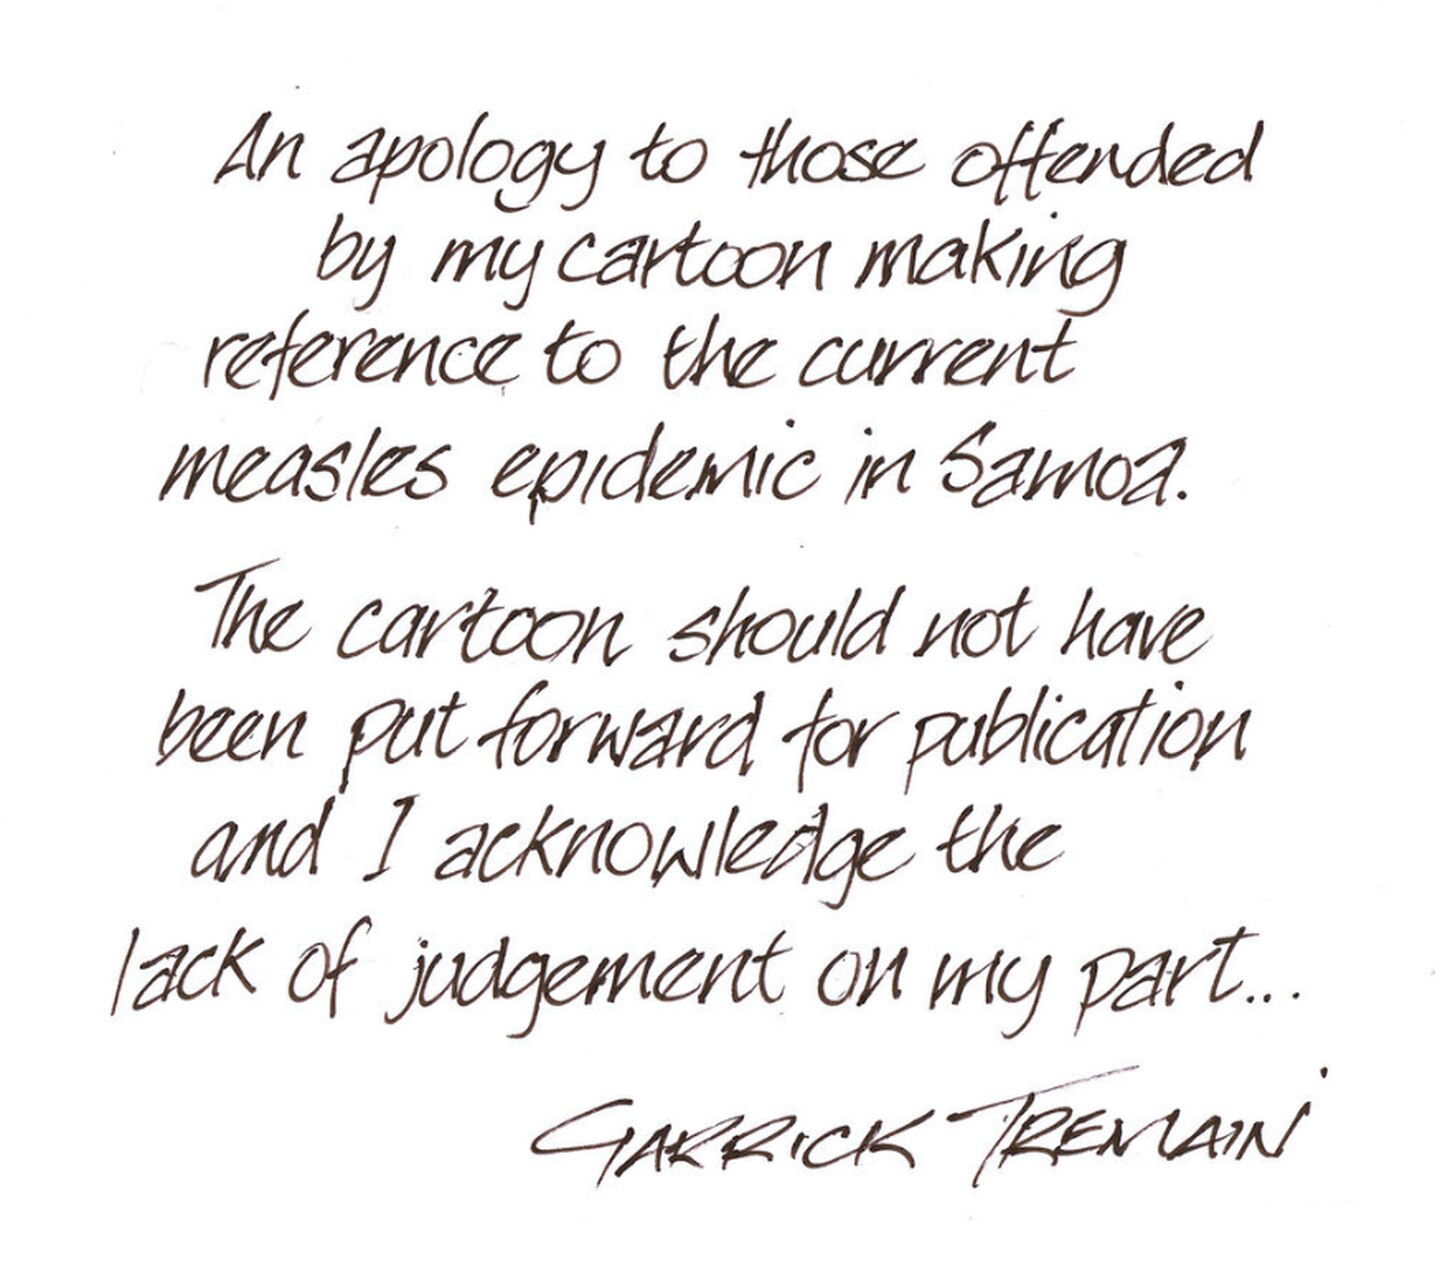 An apology posted on Garrick Tremain's website.